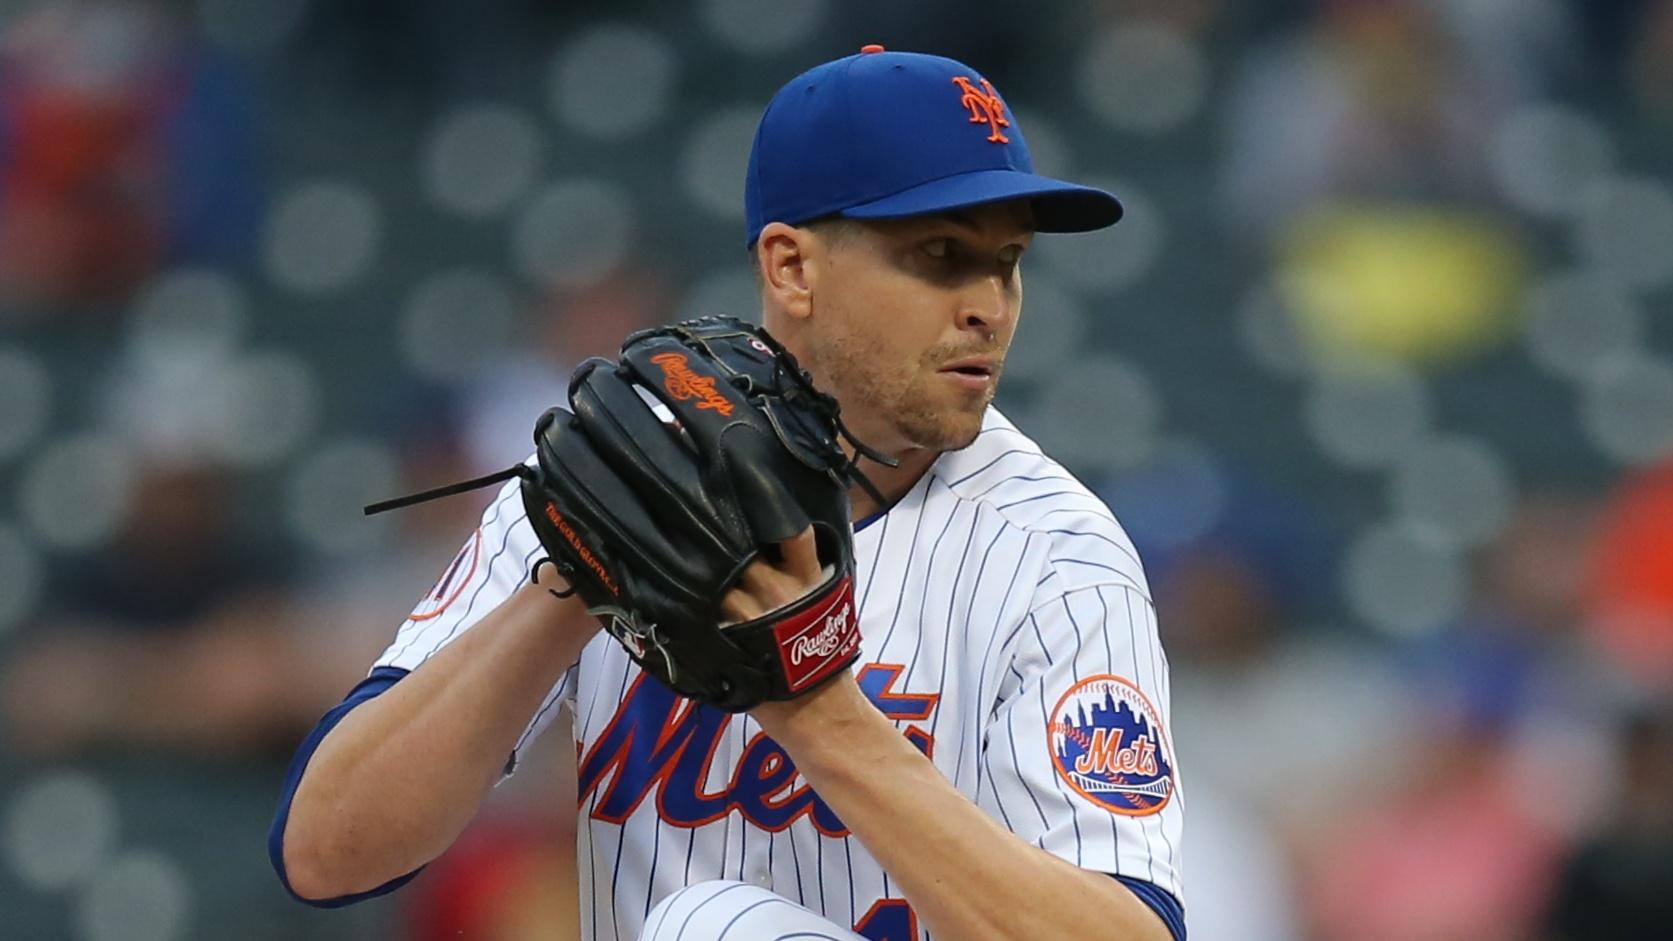 Apr 28, 2021; New York City, New York, USA; New York Mets starting pitcher Jacob deGrom (48) pitches against the Boston Red Sox during the first inning at Citi Field. Mandatory Credit: Brad Penner-USA TODAY Sports / © Brad Penner-USA TODAY Sports